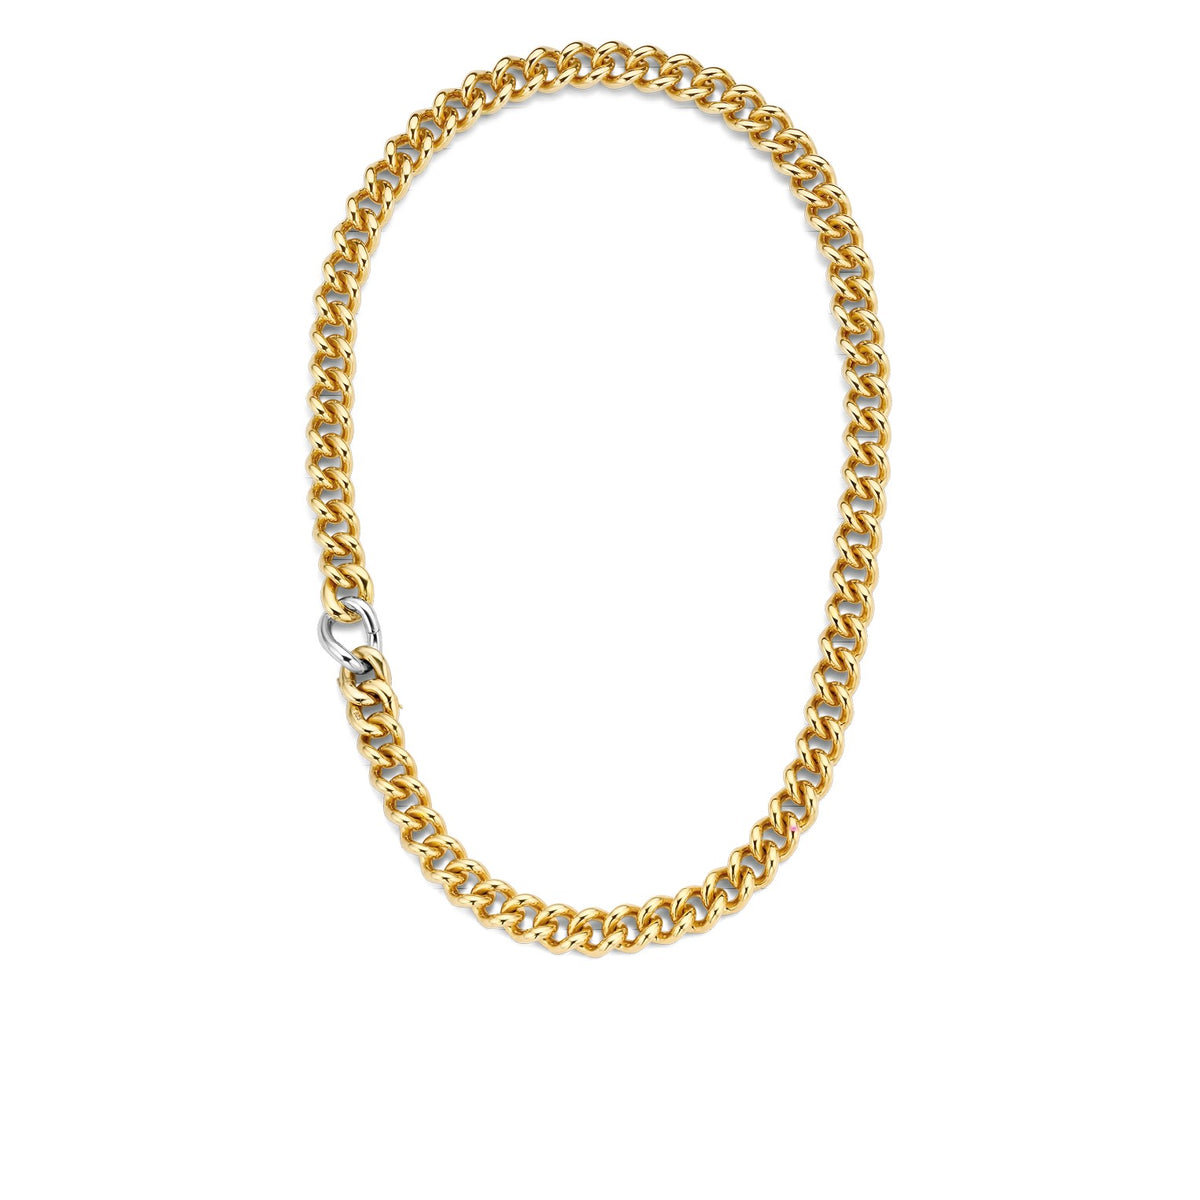 TI SENTO Sterling Silver Gold Tone Heavy Link Necklace